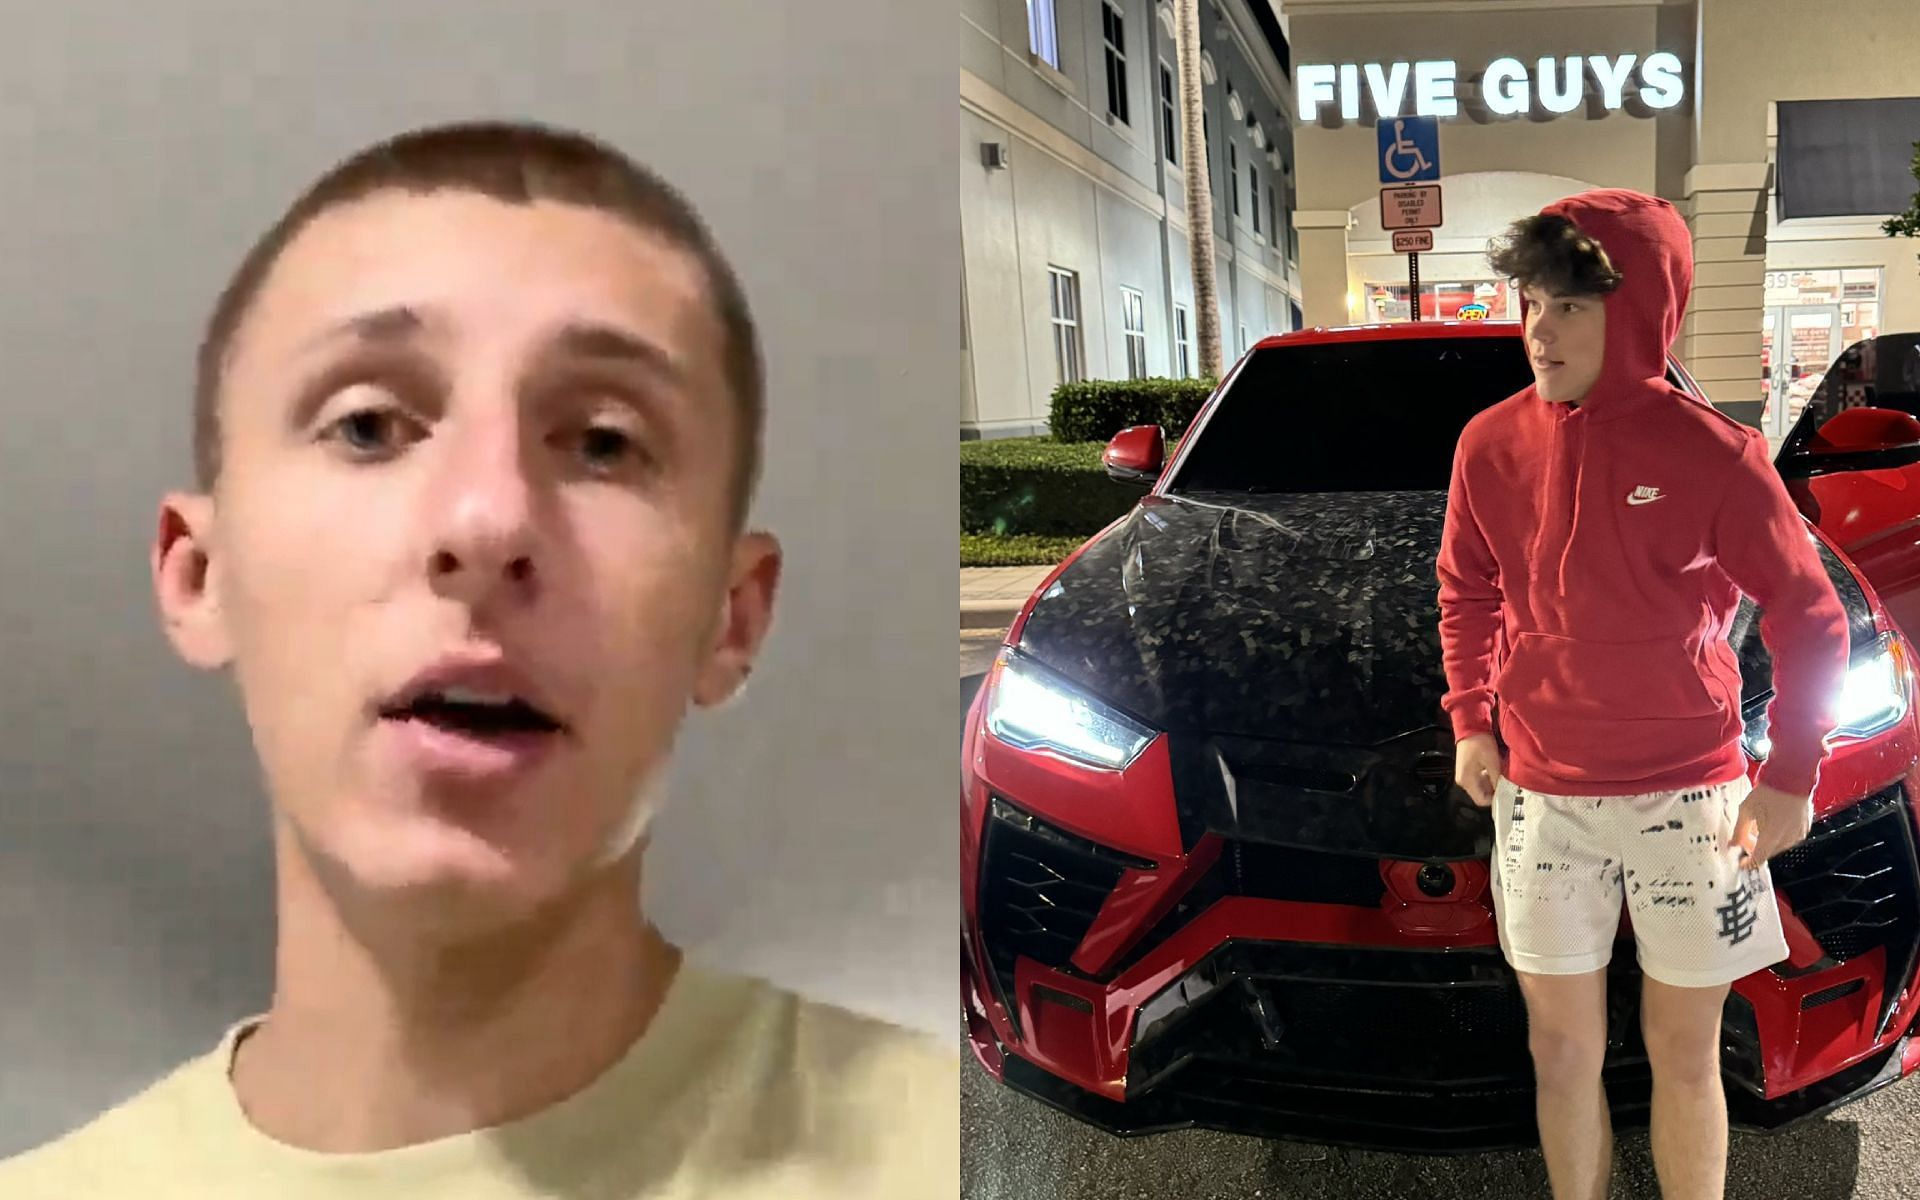 Kick streamer Norway accuses Jack Doherty of allegedly housing underage female at his home